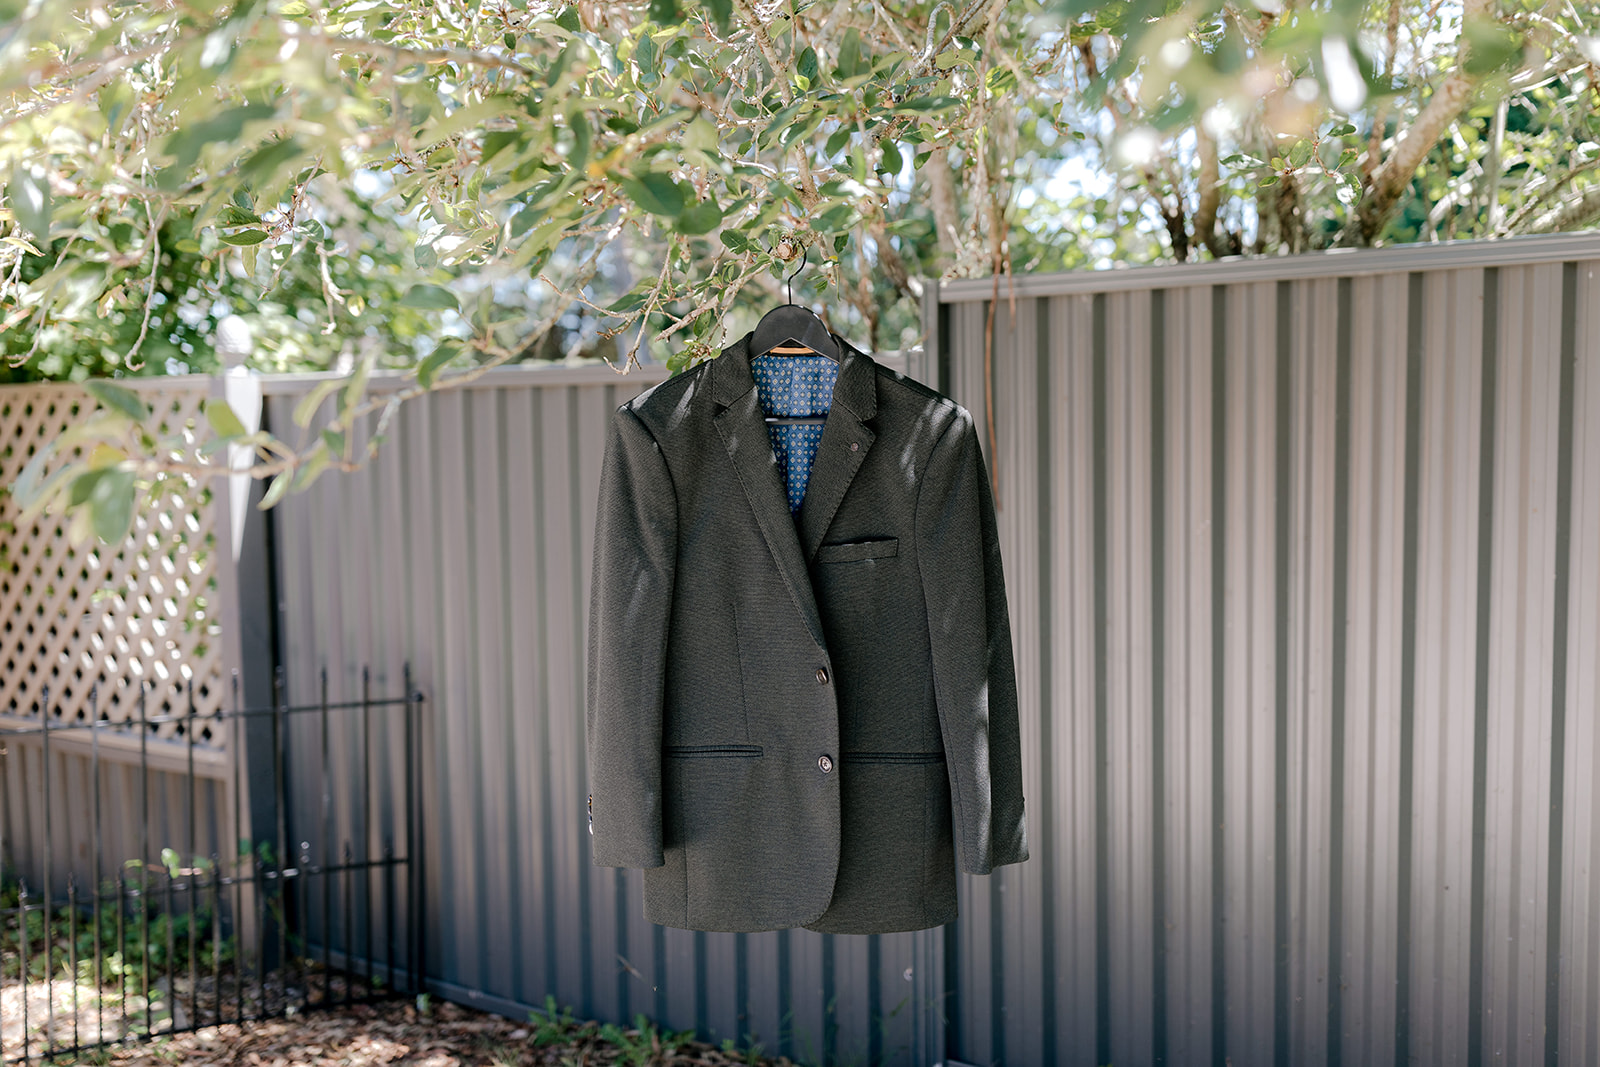 Groom jacket for an elegant country wedding.